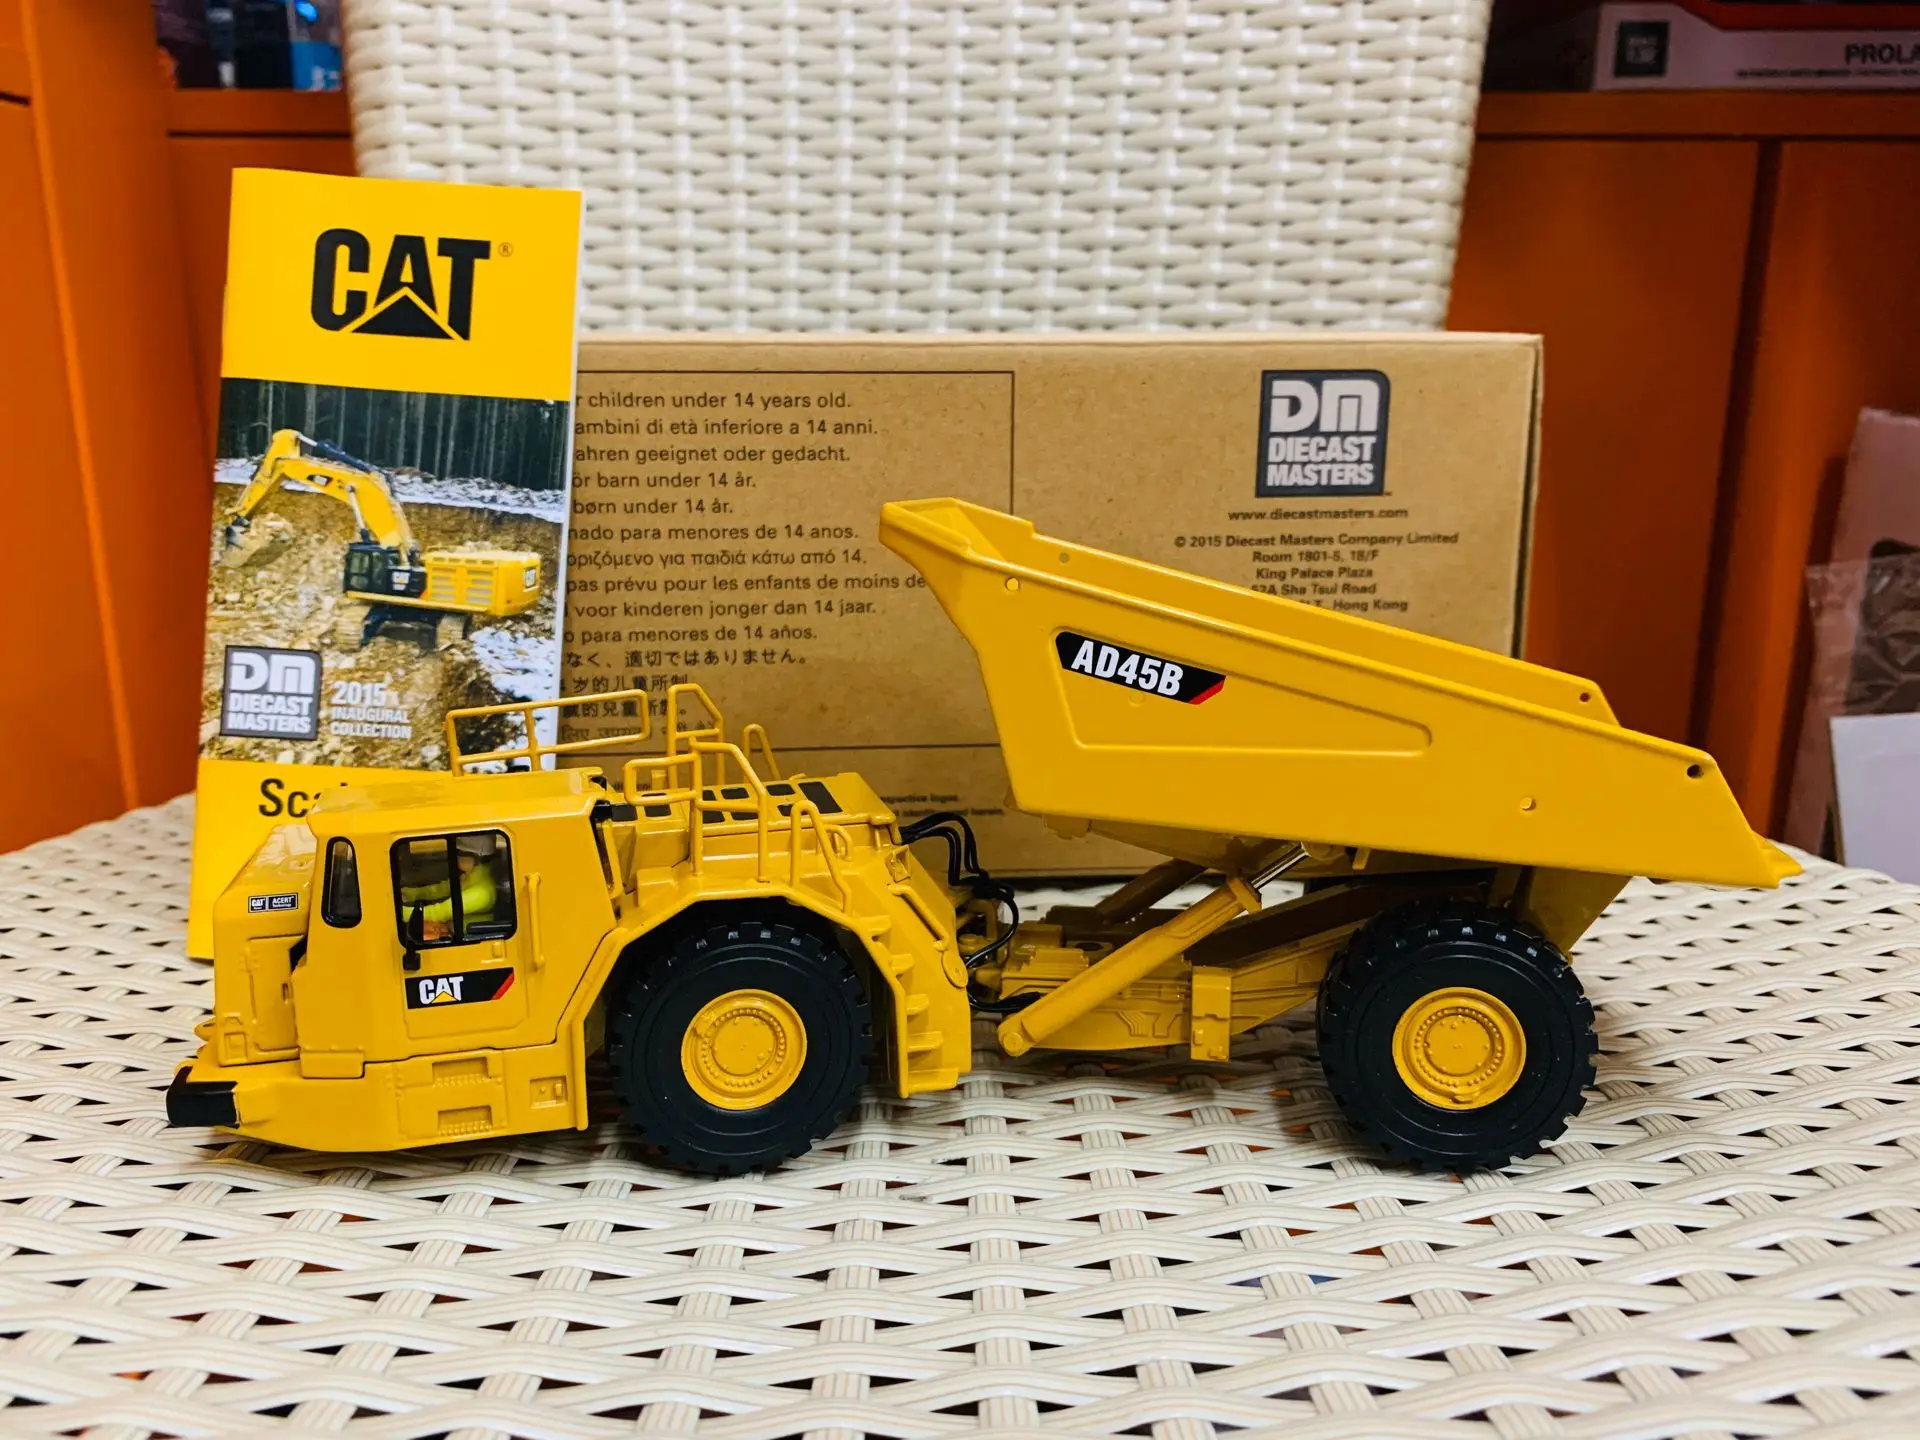 

Caterpillar Cat AD45B Underground Articulated Truck 1/50 Scale Metal Model By DieCast Masters 85191 New in Box